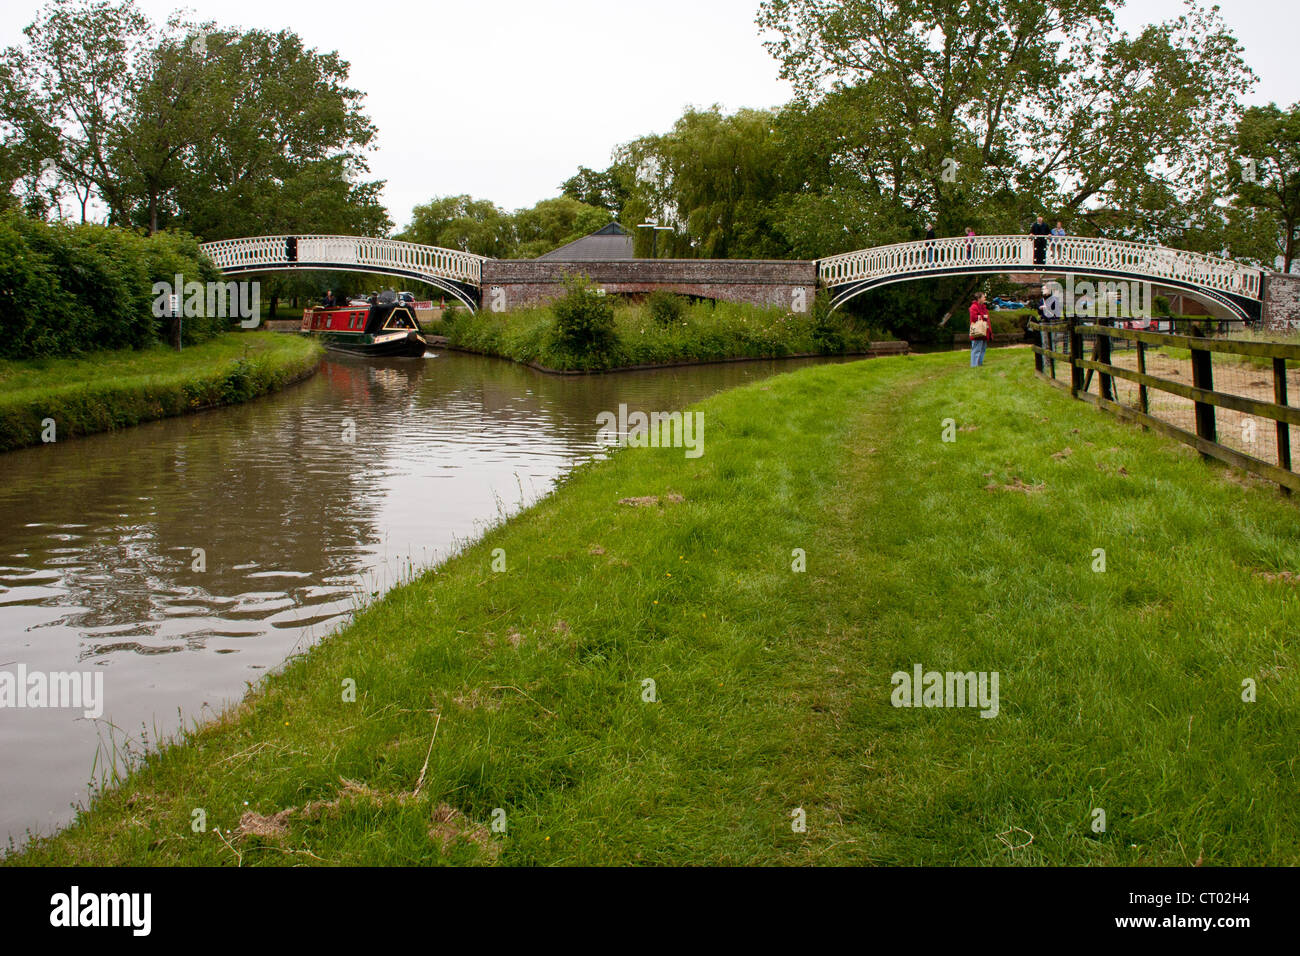 At  Braunston the Oxford canal from the north (left in the picture) joins the Grand Union Canal. There are two iron bridges. Stock Photo